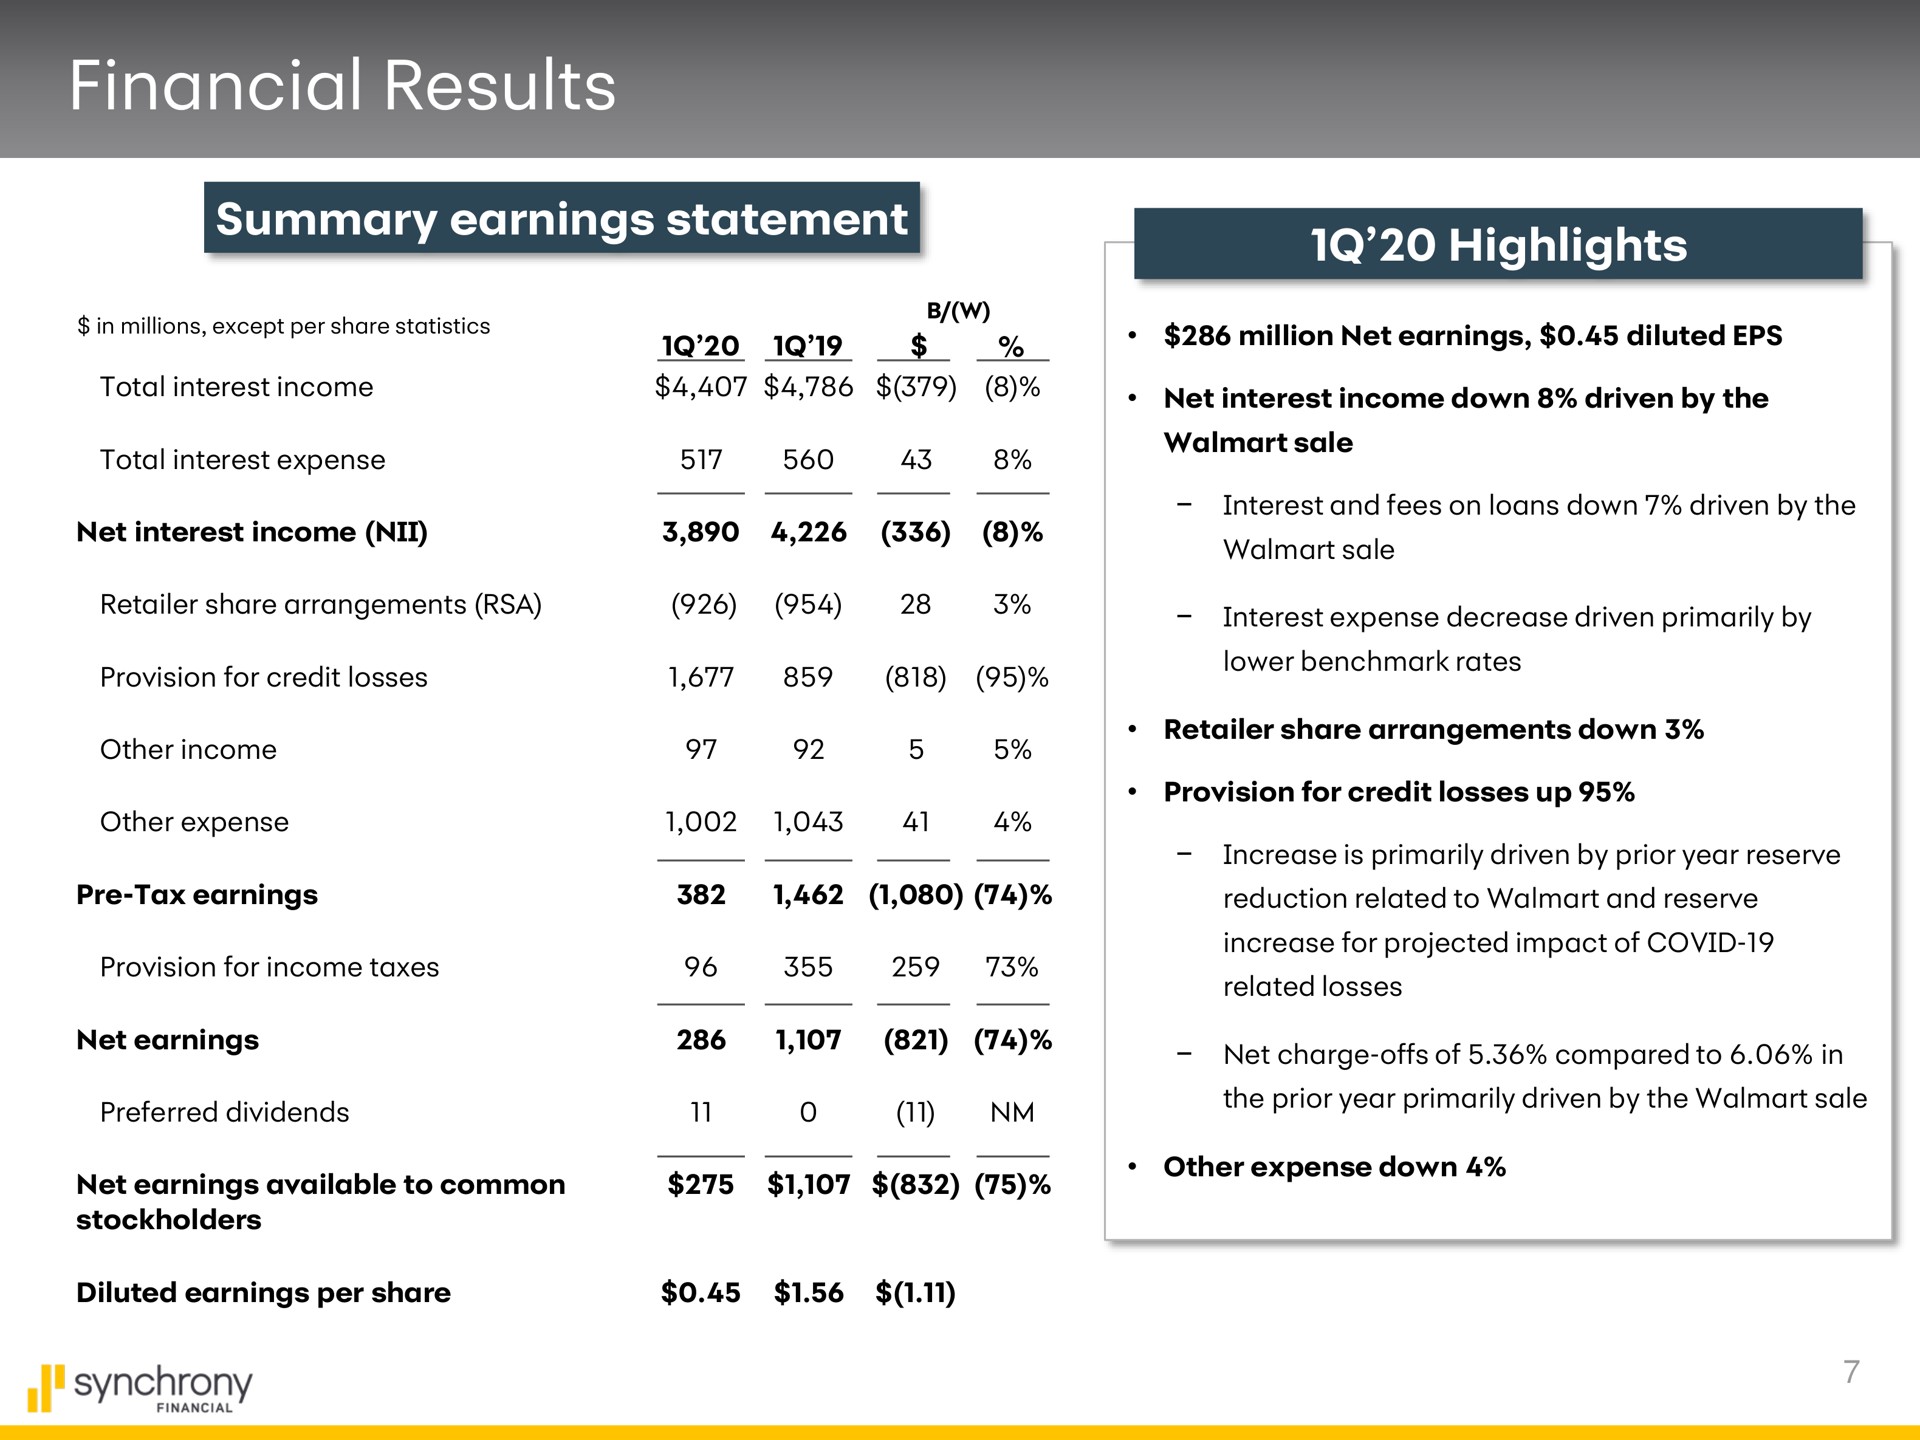 financial results summary earnings statement highlights synchrony | Synchrony Financial